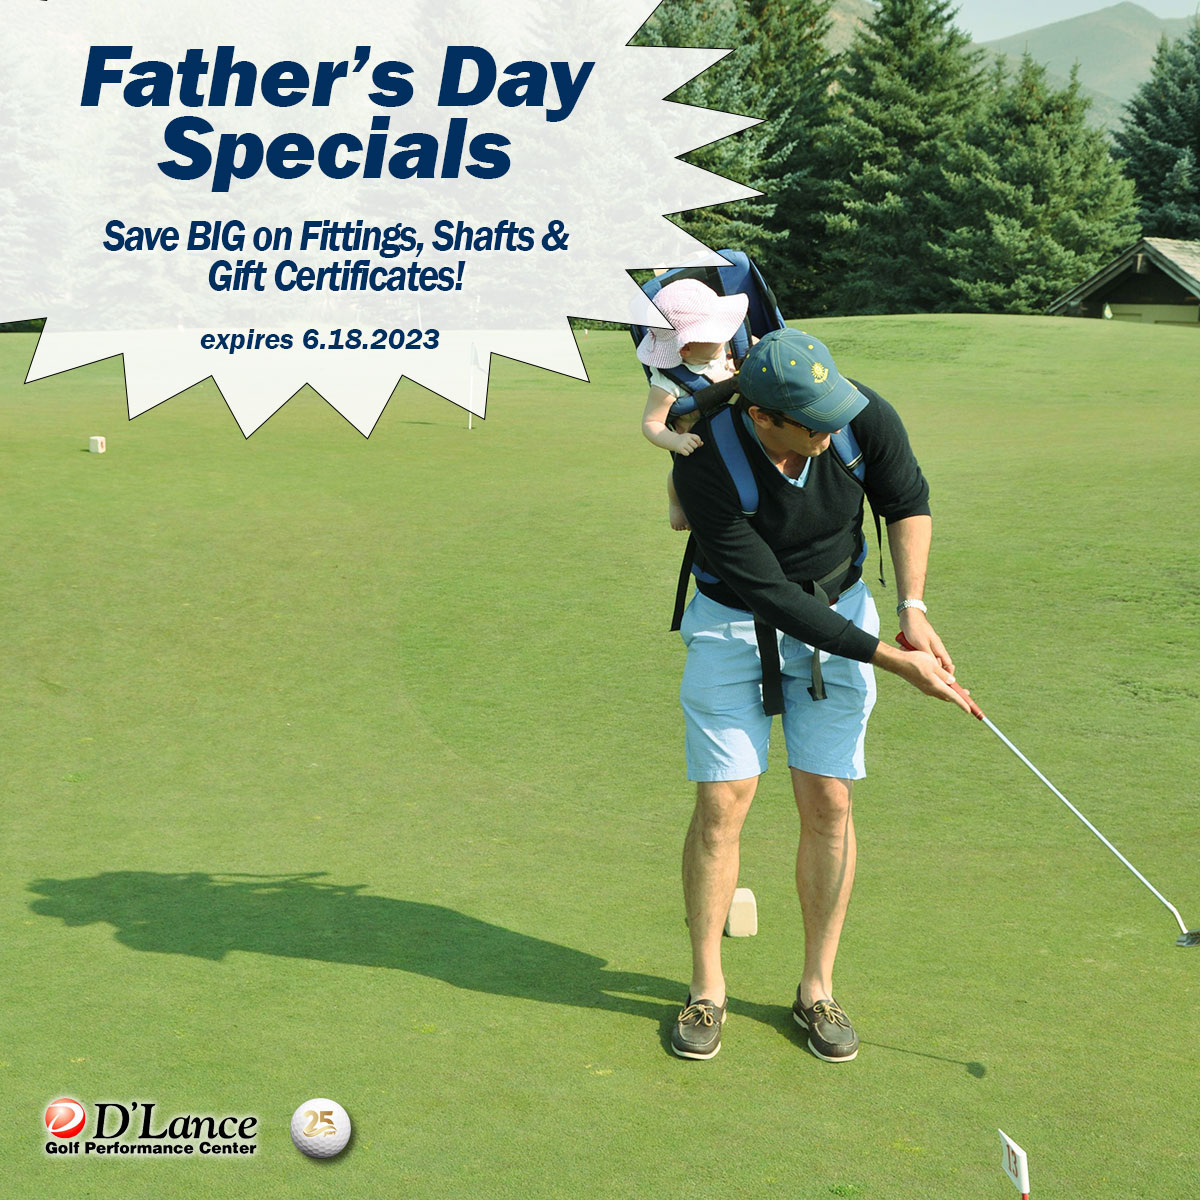 Father's Day Specials 2023 | D'Lance Golf